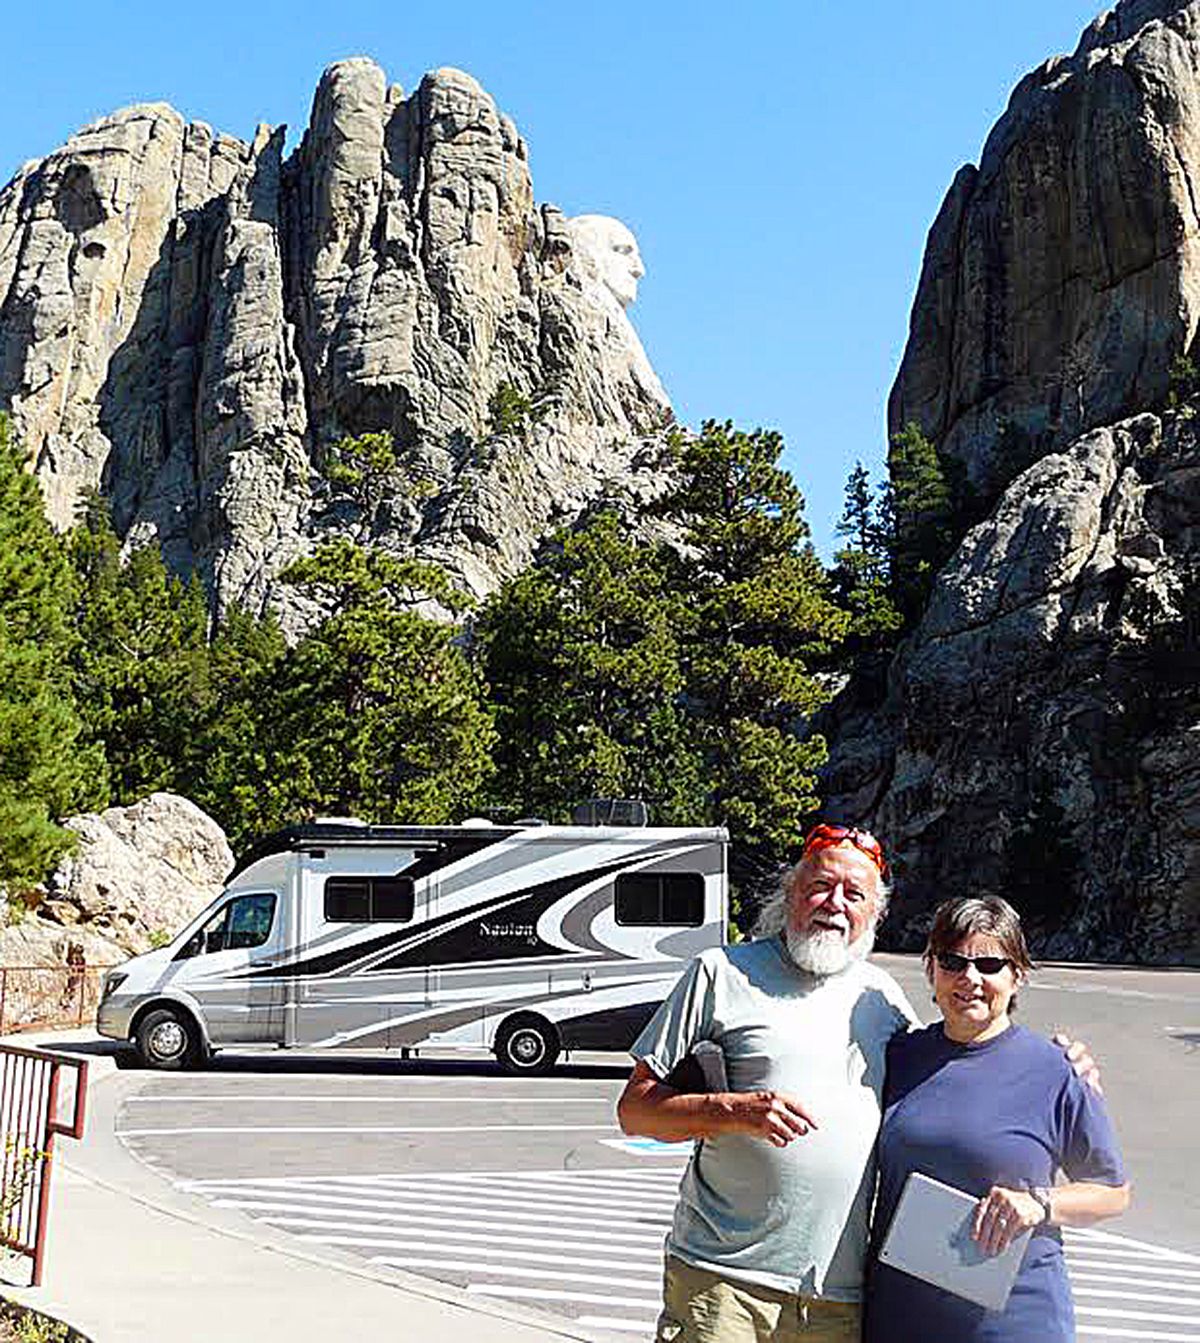 Seabury Blair Jr. and his wife Marlene, shortly after buying their 2014 Itasca IQ during a visit to Mount Rushmore National Memorial in South Dakota.